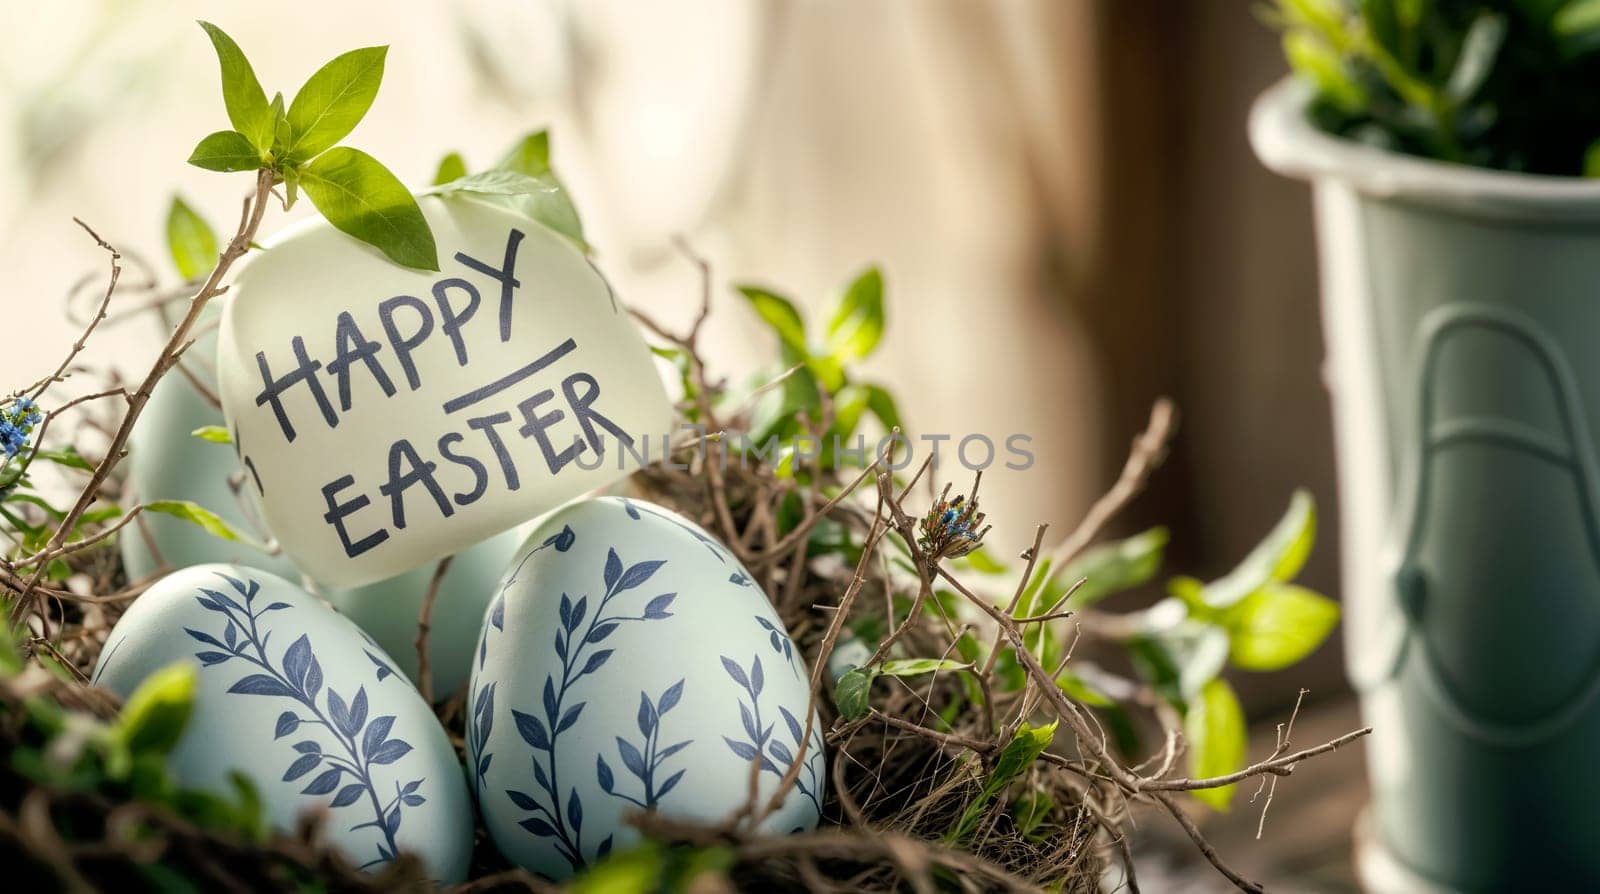 This image captures the essence of Easter celebrations with delicately painted eggs and a cheerful Happy Easter message resting in a birds nest among spring greenery - Generative AI